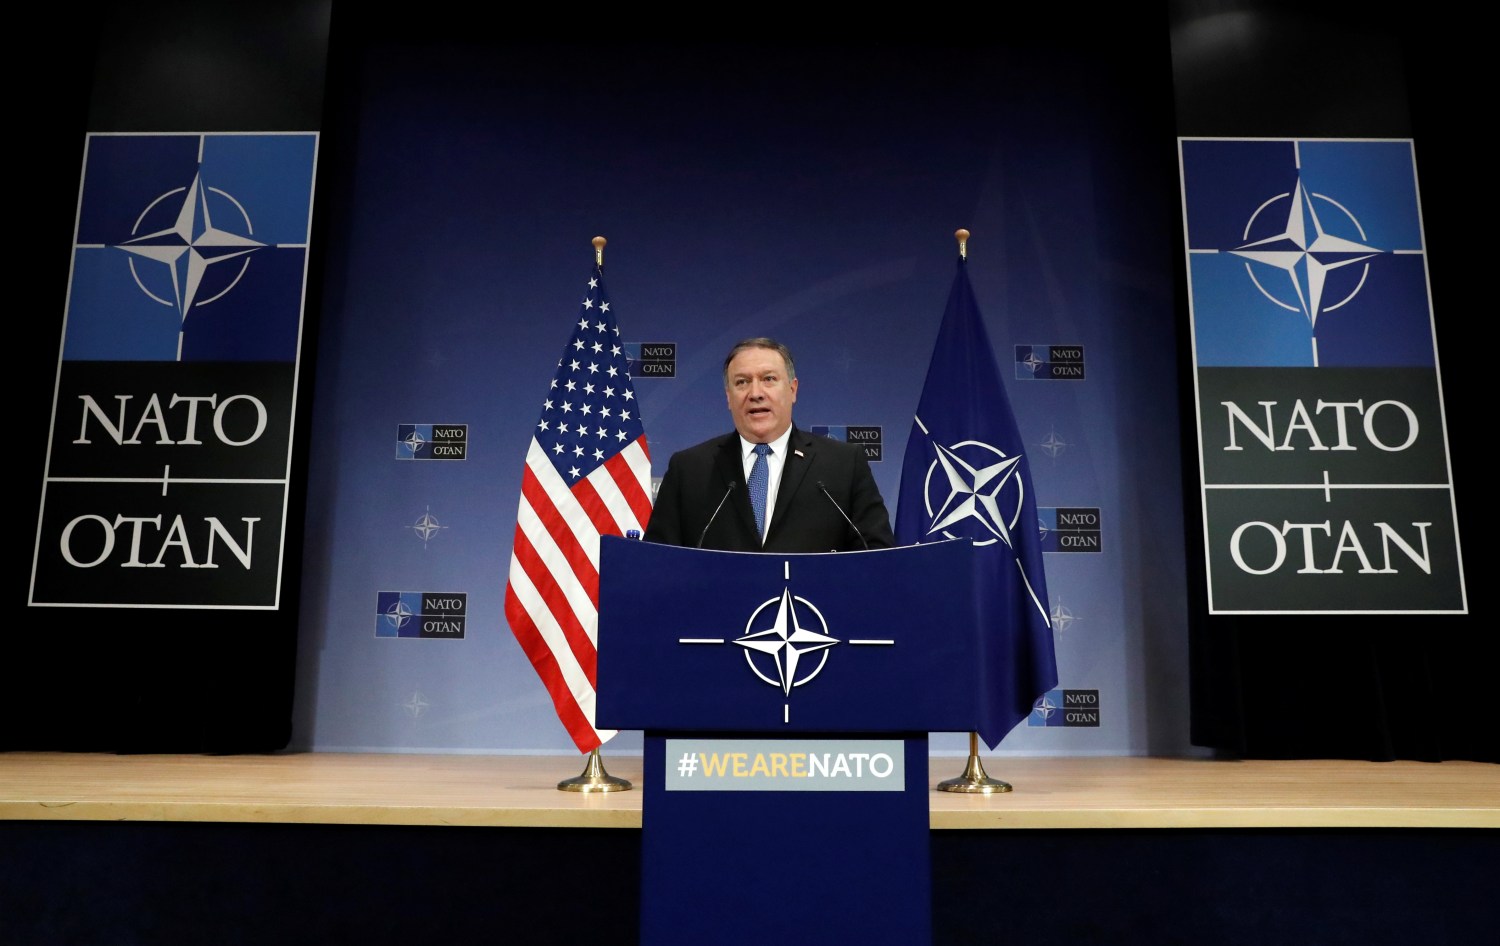 U.S. Secretary of State Mike Pompeo attends a news conference at the Alliance's headquarters, in Brussels.